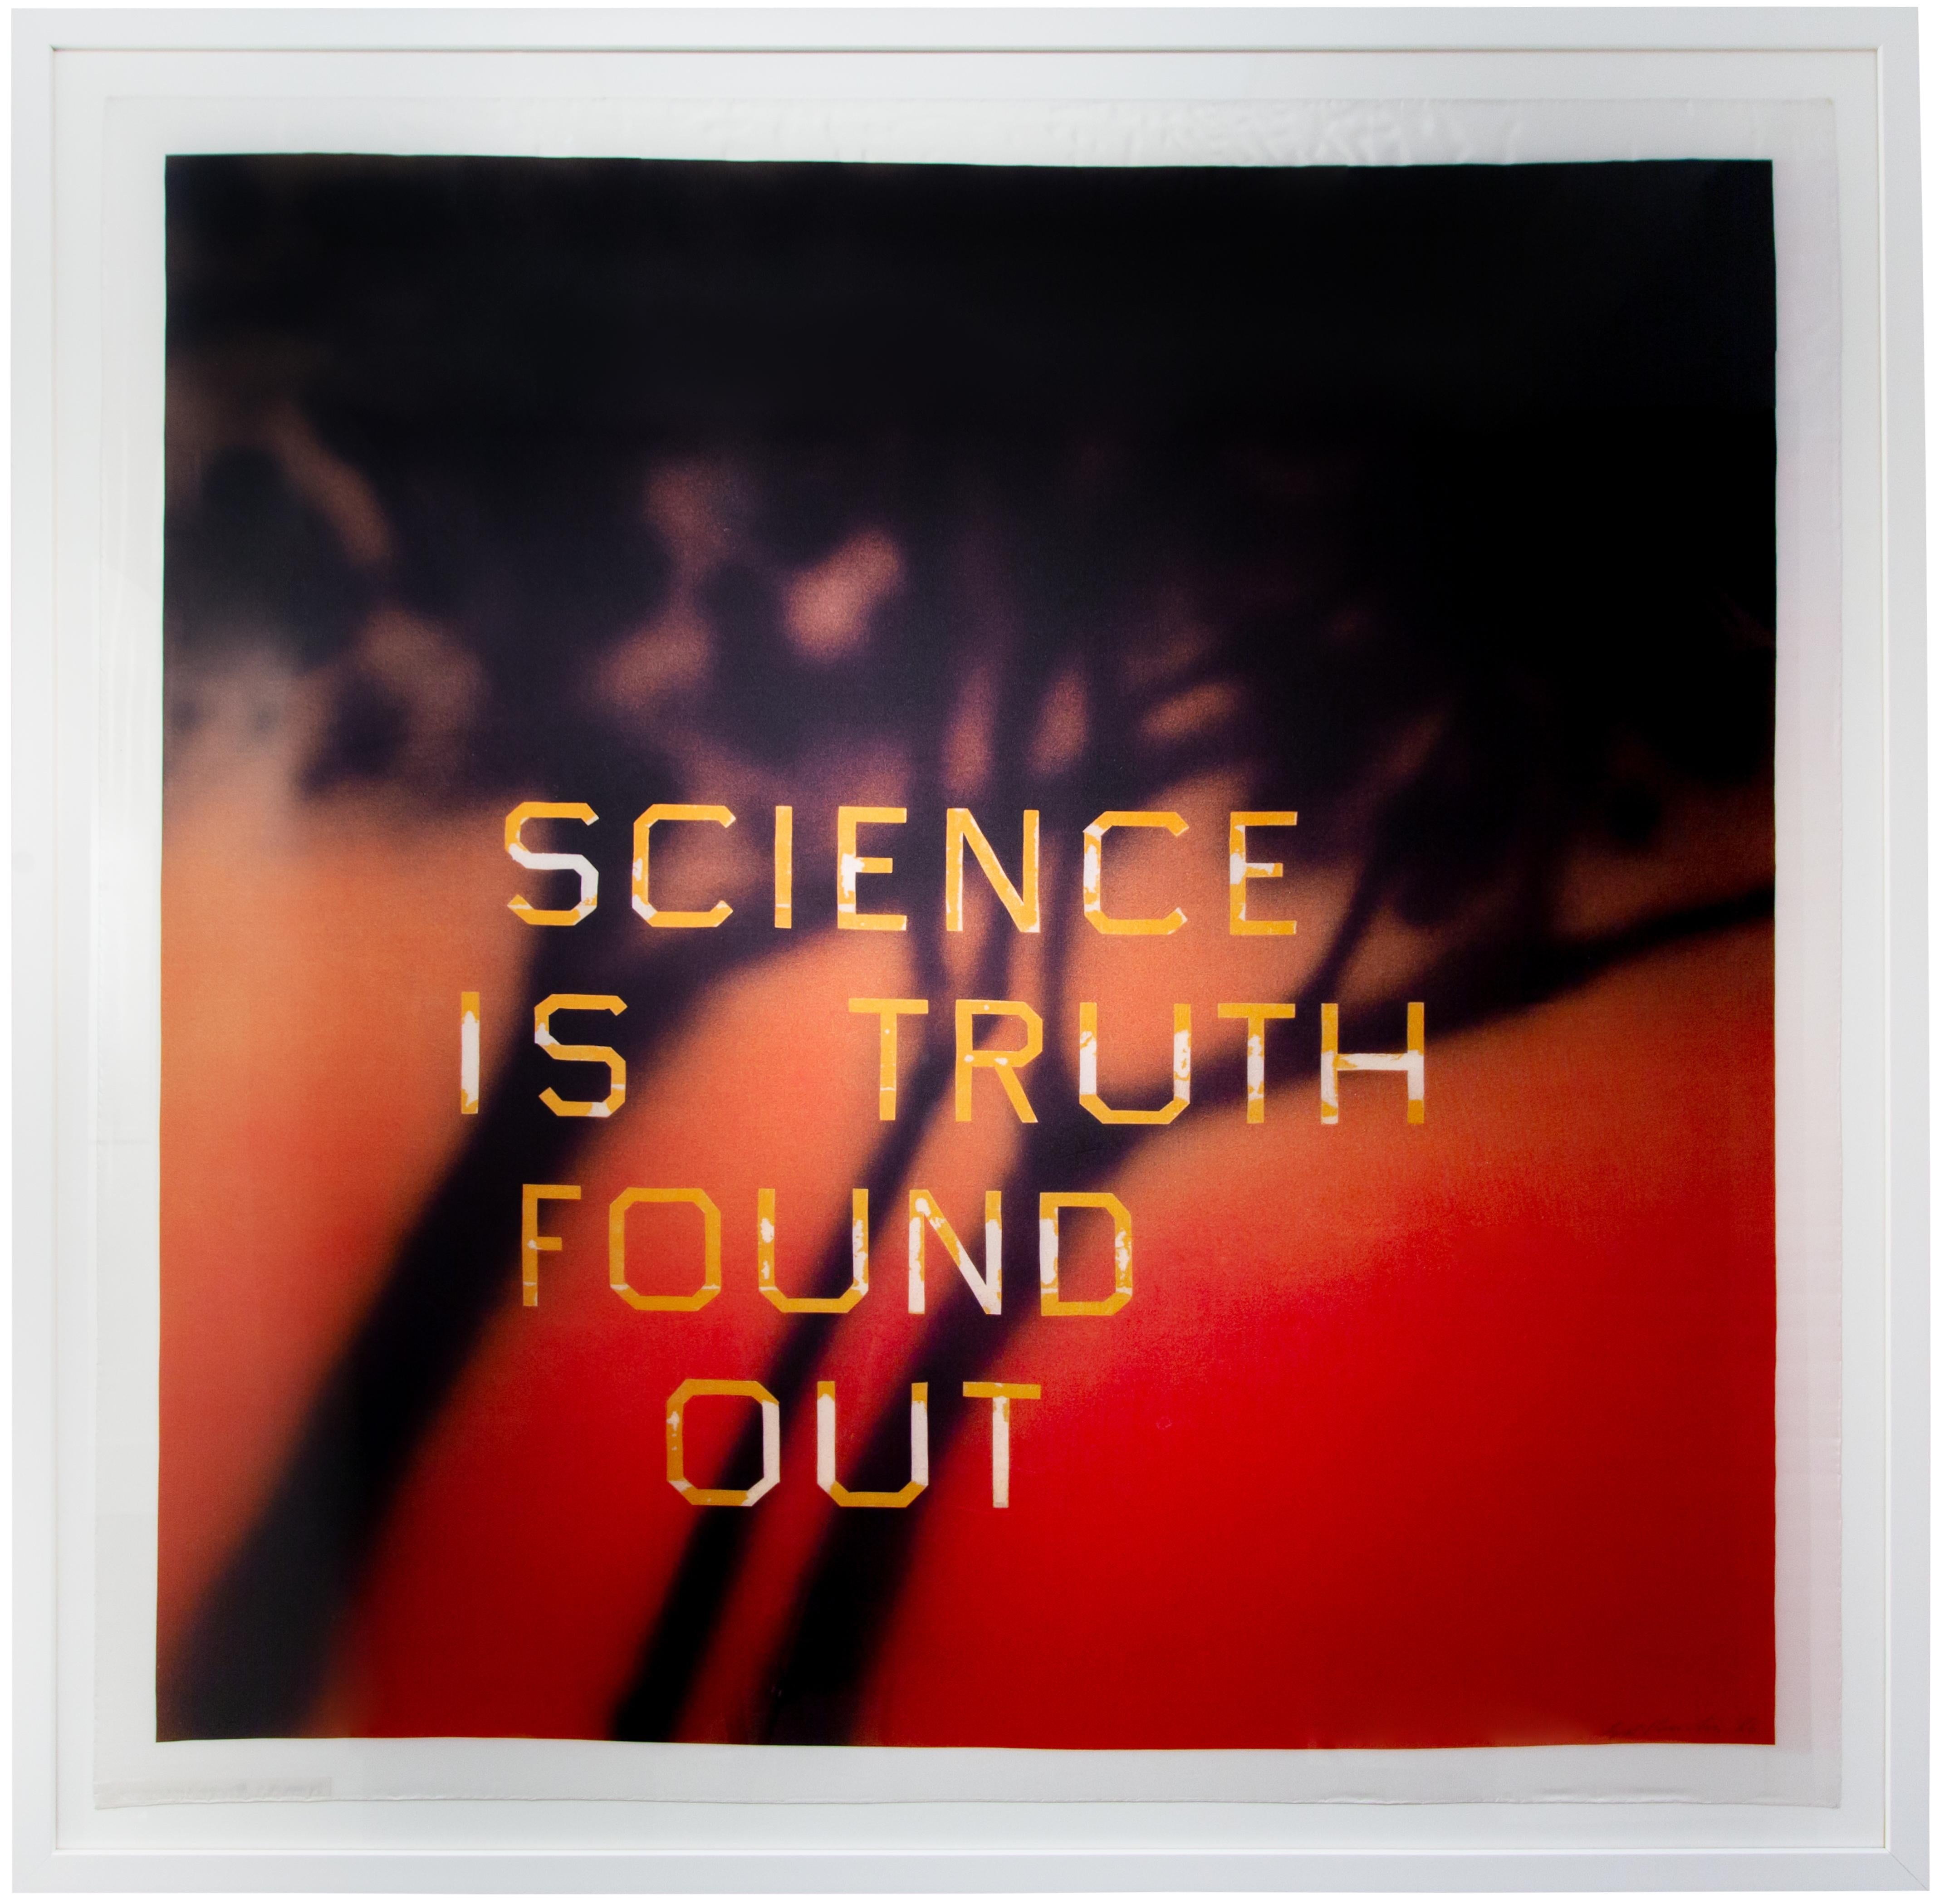 SCIENCE IS TRUTH FOUND OUT (RED)ITION - Print by Ed Ruscha